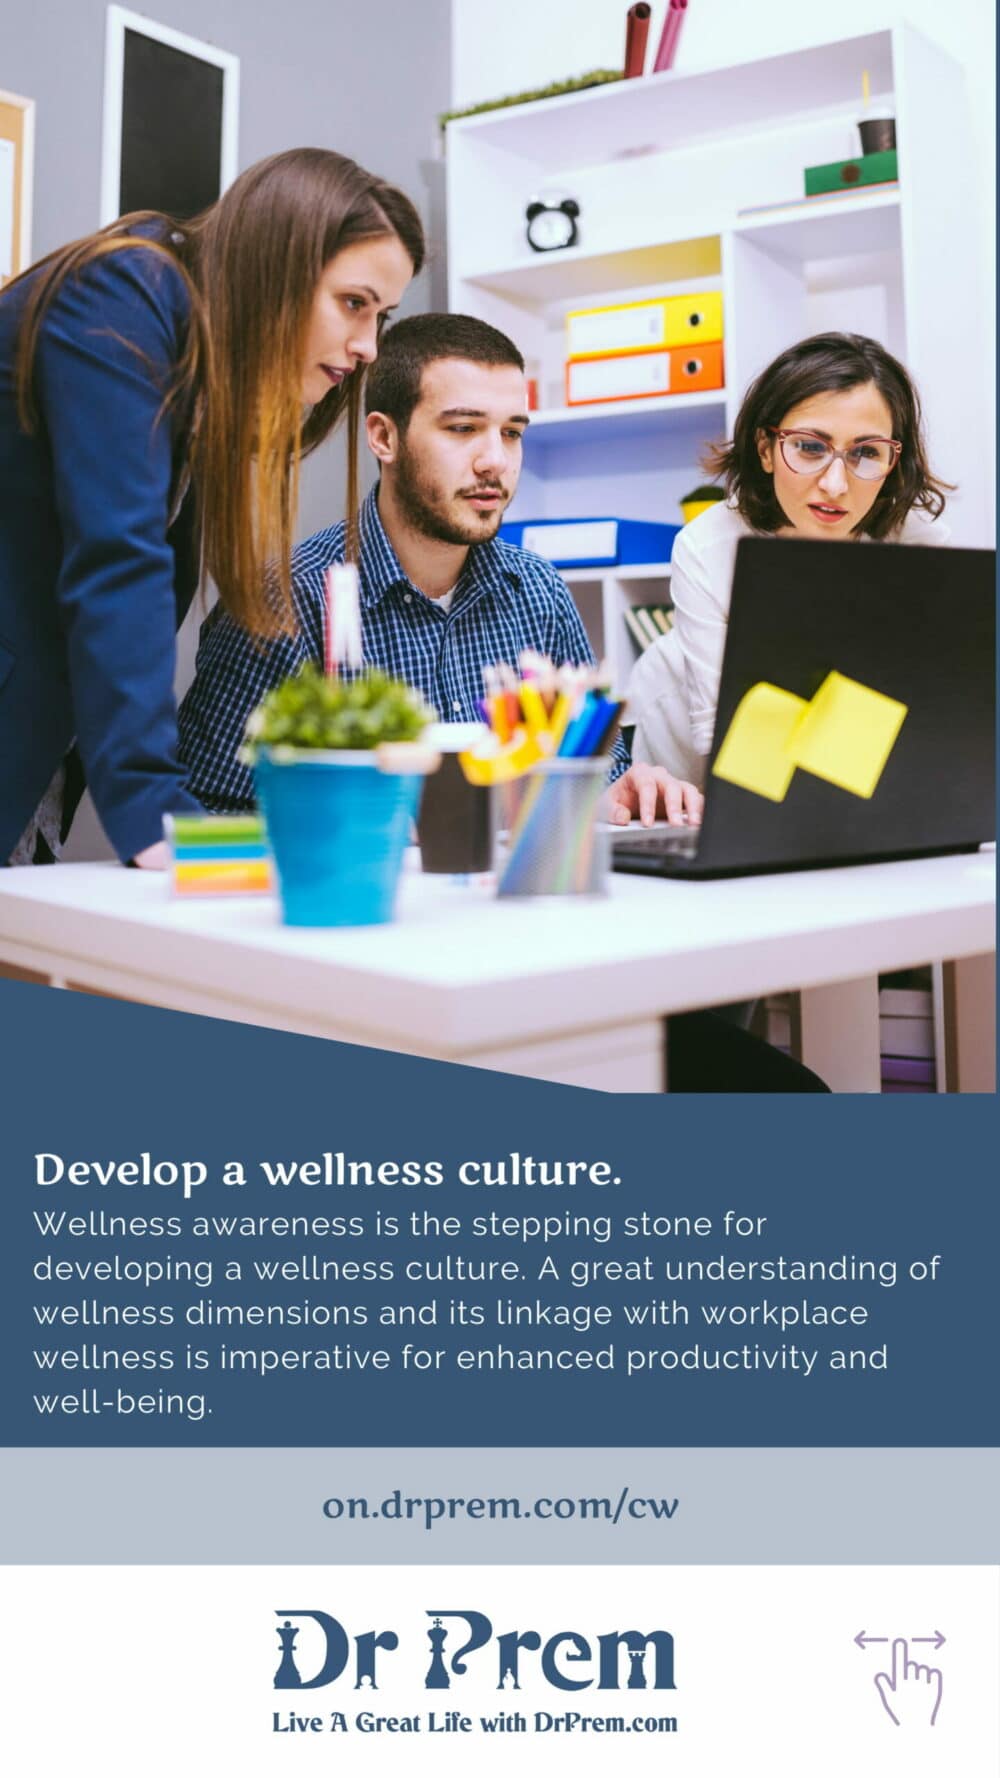 Best Corporate Culture And Wellness Practices To Drive Engagement, Productivity And Well-Being-03